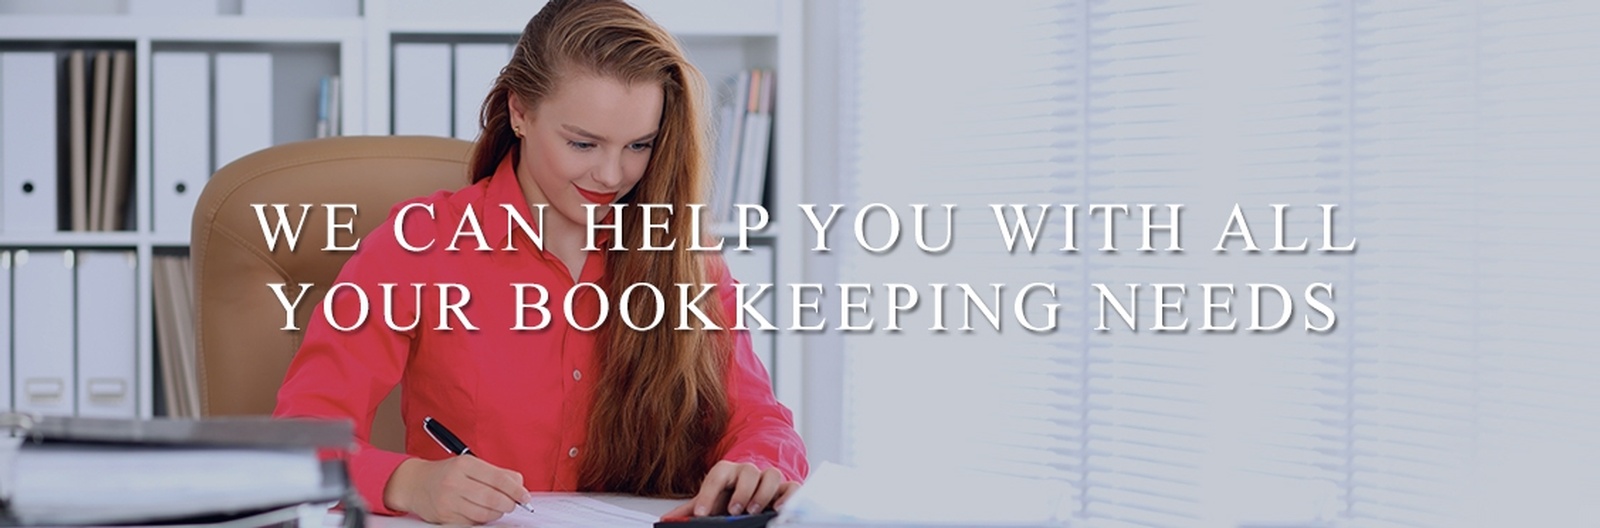 bookkeeping services calgary 